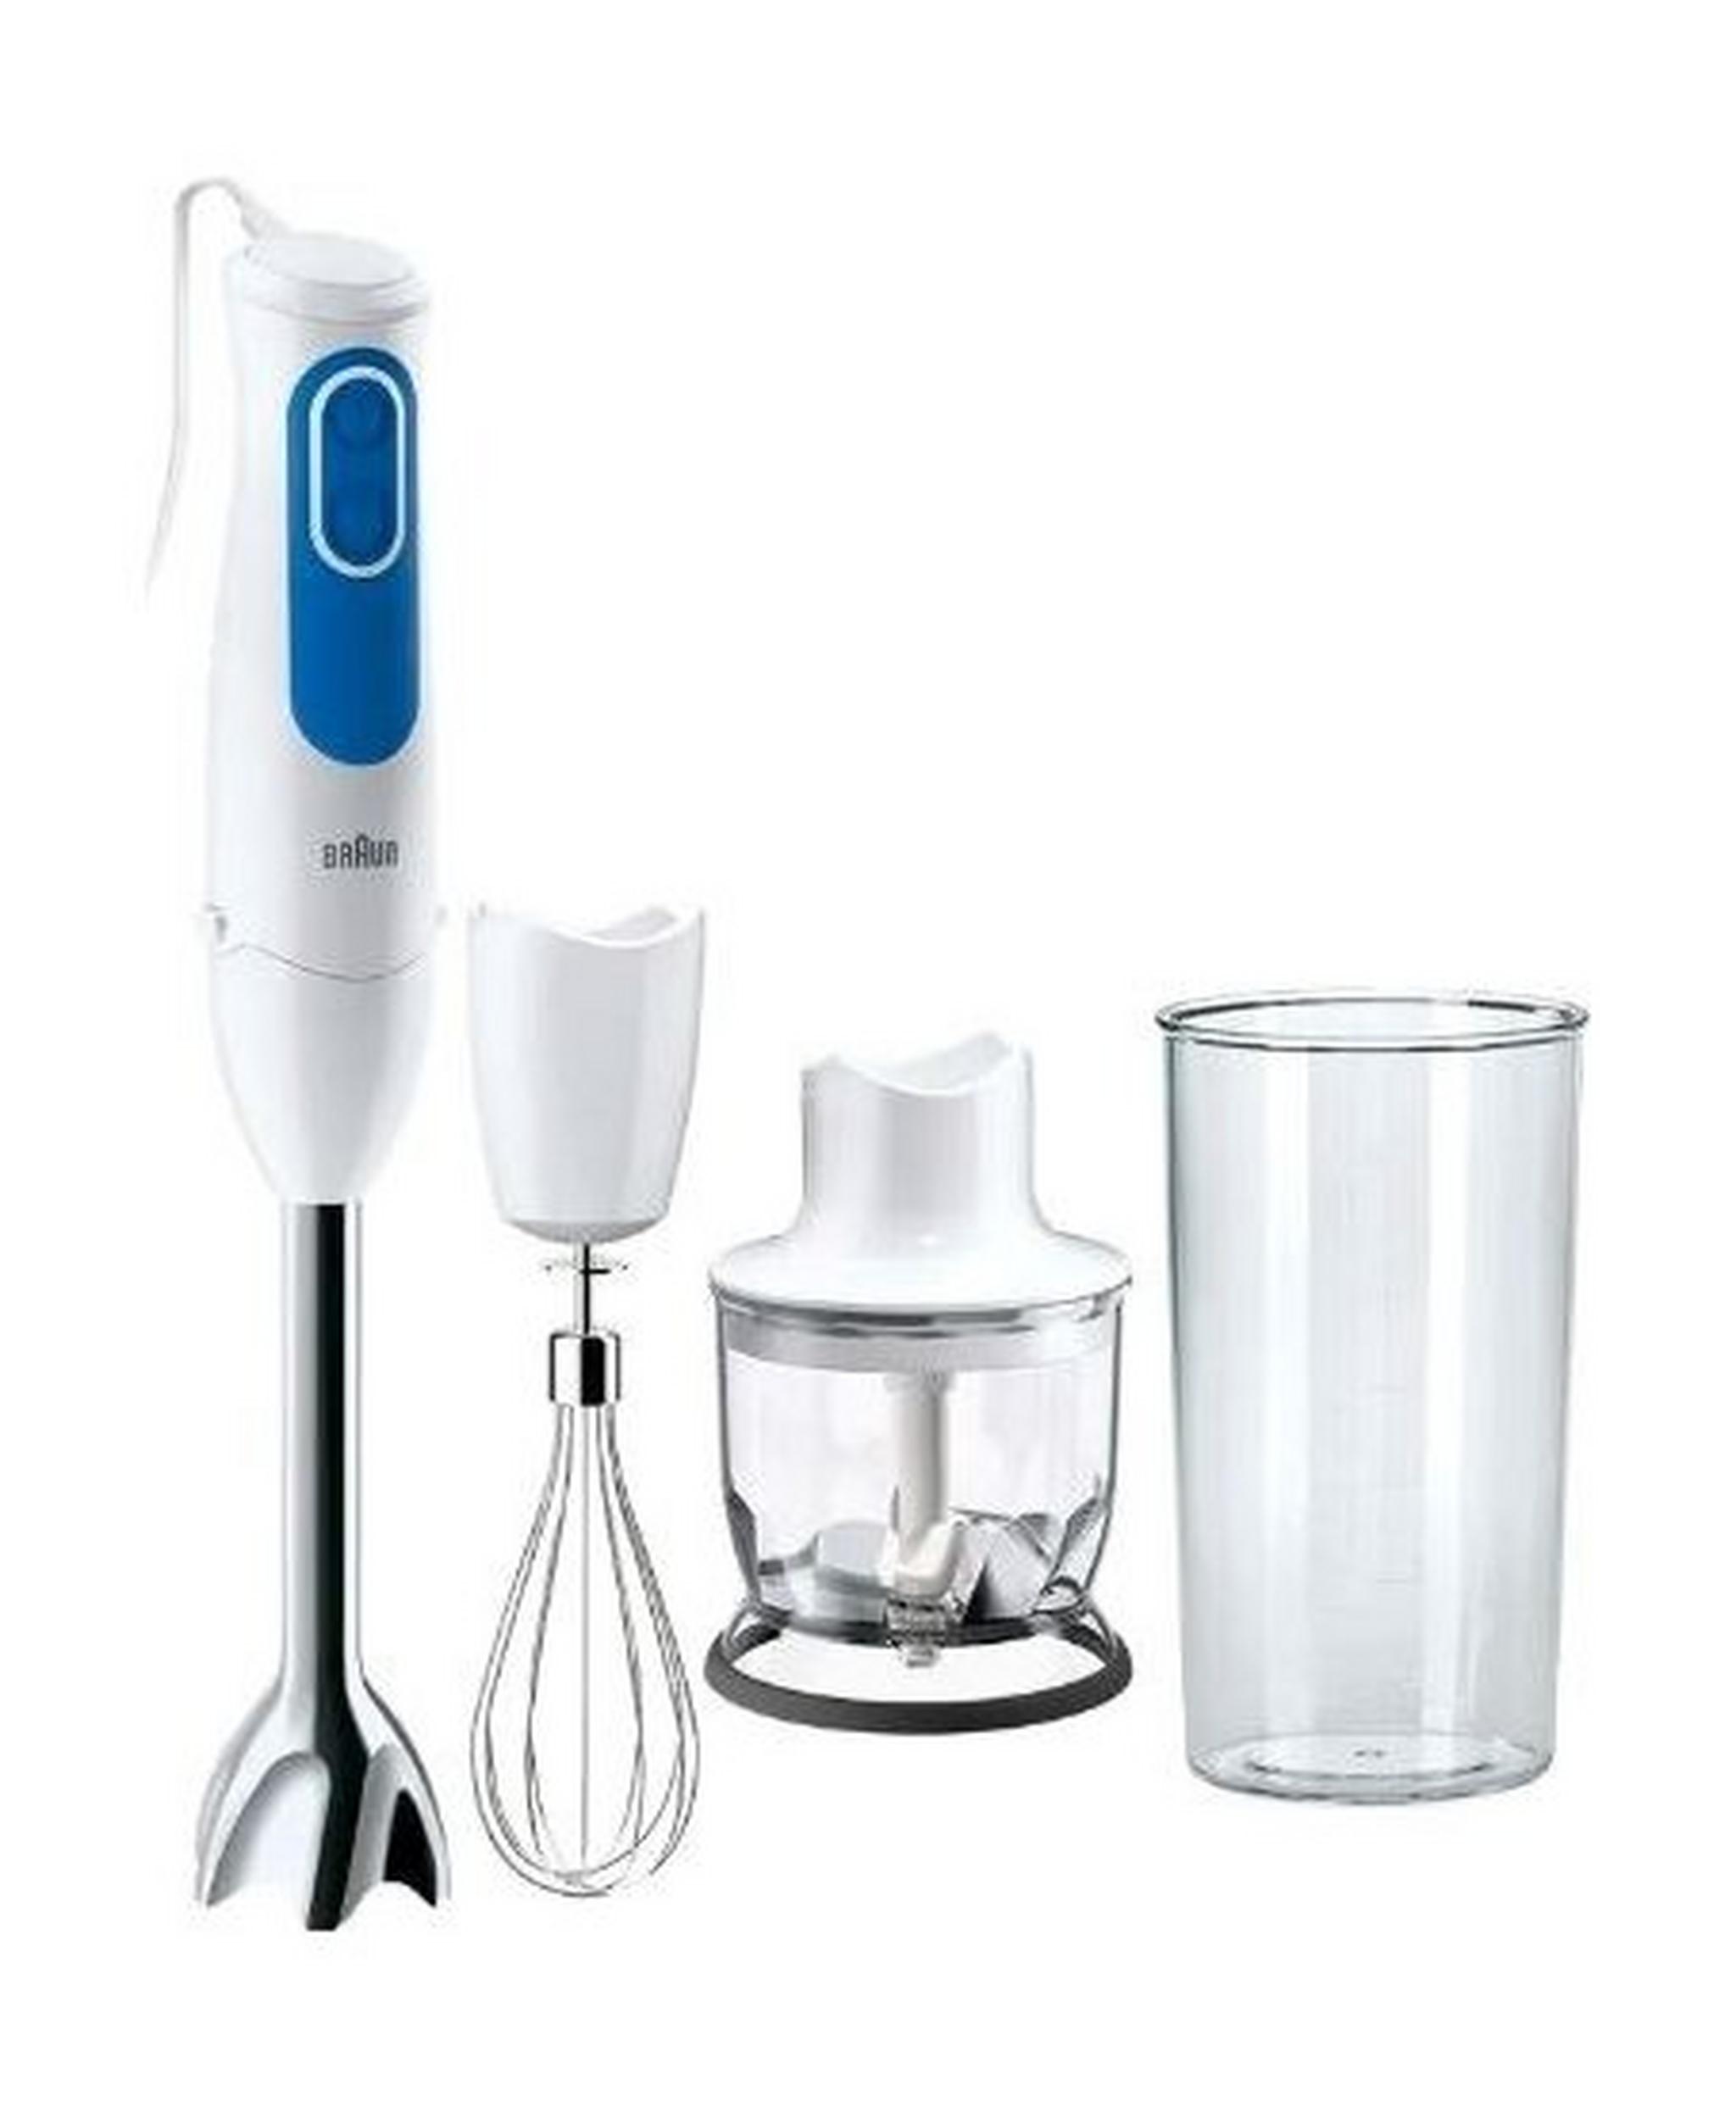 Braun Omlette MultiQuick 3 Hand Blender with Chopper and Whisk - 700W (MQ 3025)